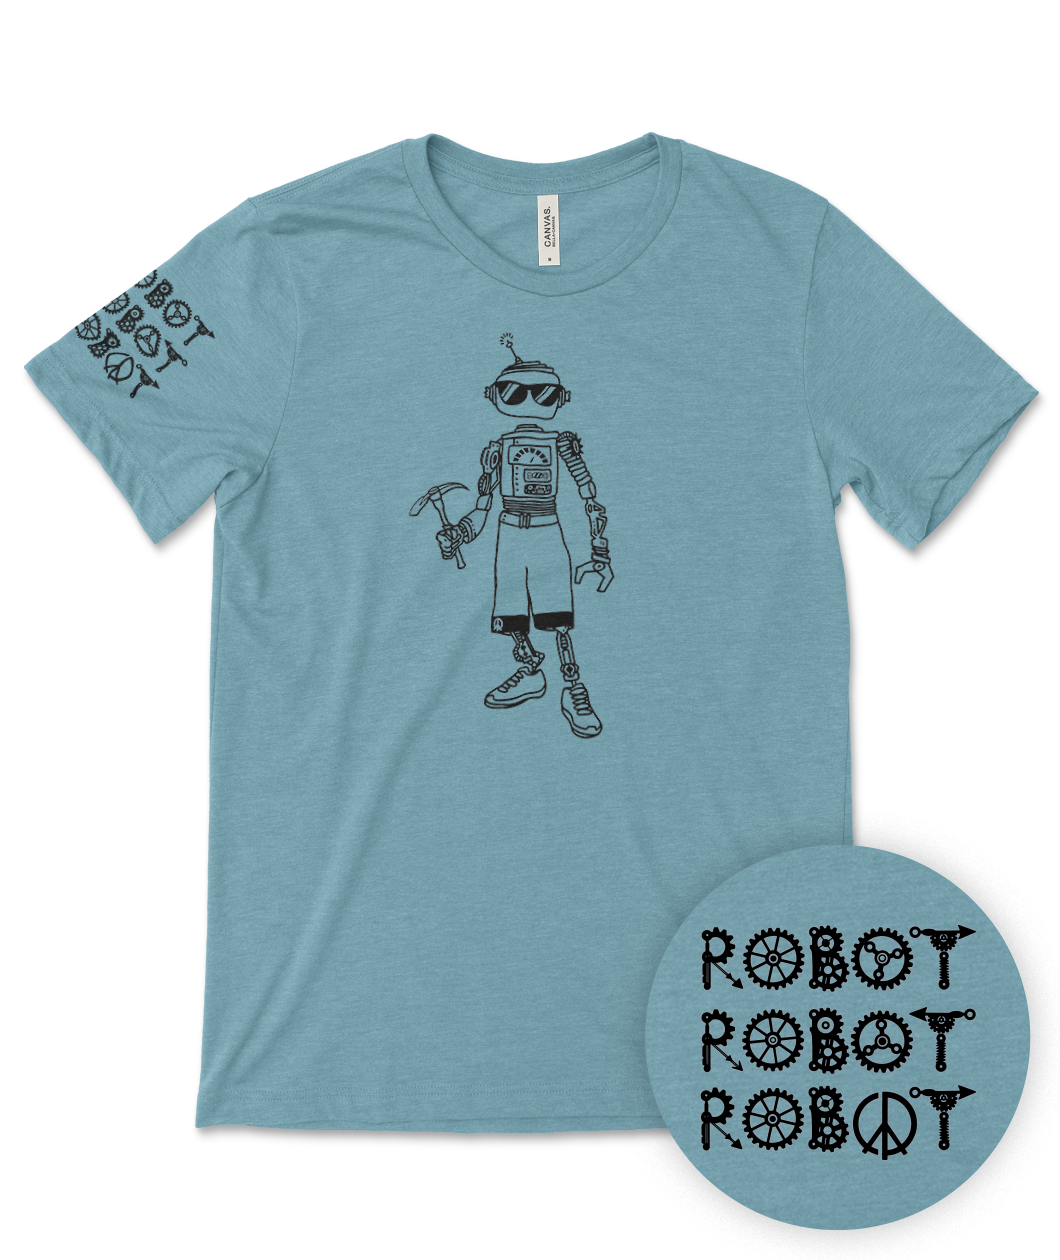 Courtney Dauwalter Robot, Robot, Robot Shirt comes in Heather Blue and Heather Red. A black line drawing of a robot is on the front center of the shirt, while the illustrated phrase Robot, Robot, Robot adorns the right sleeve.